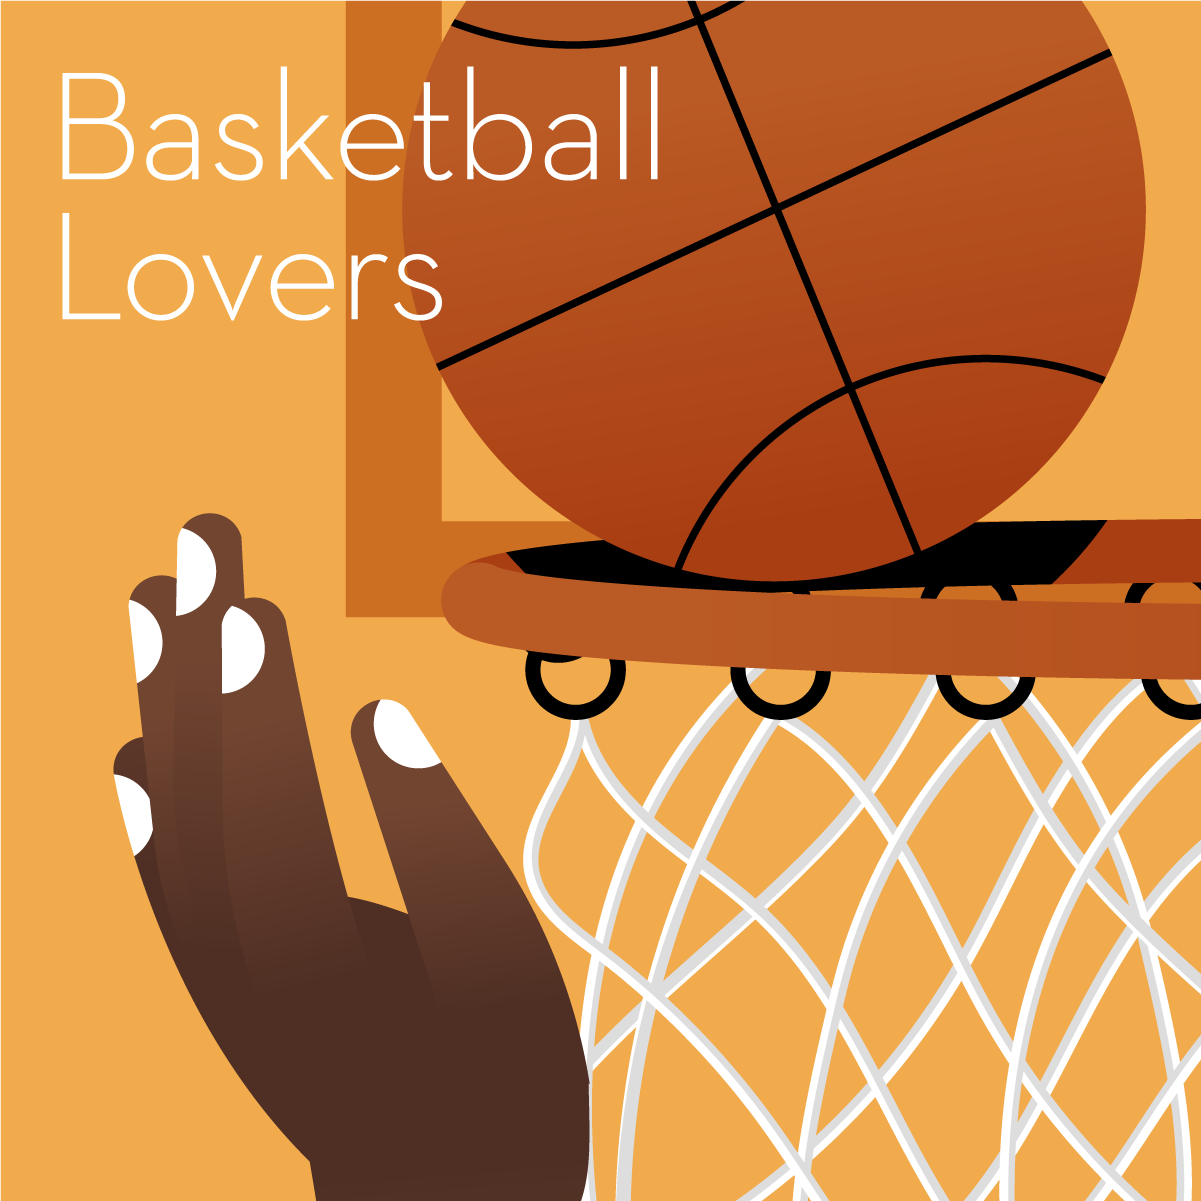 Basketball Gifts for Coaches, Players and Fans